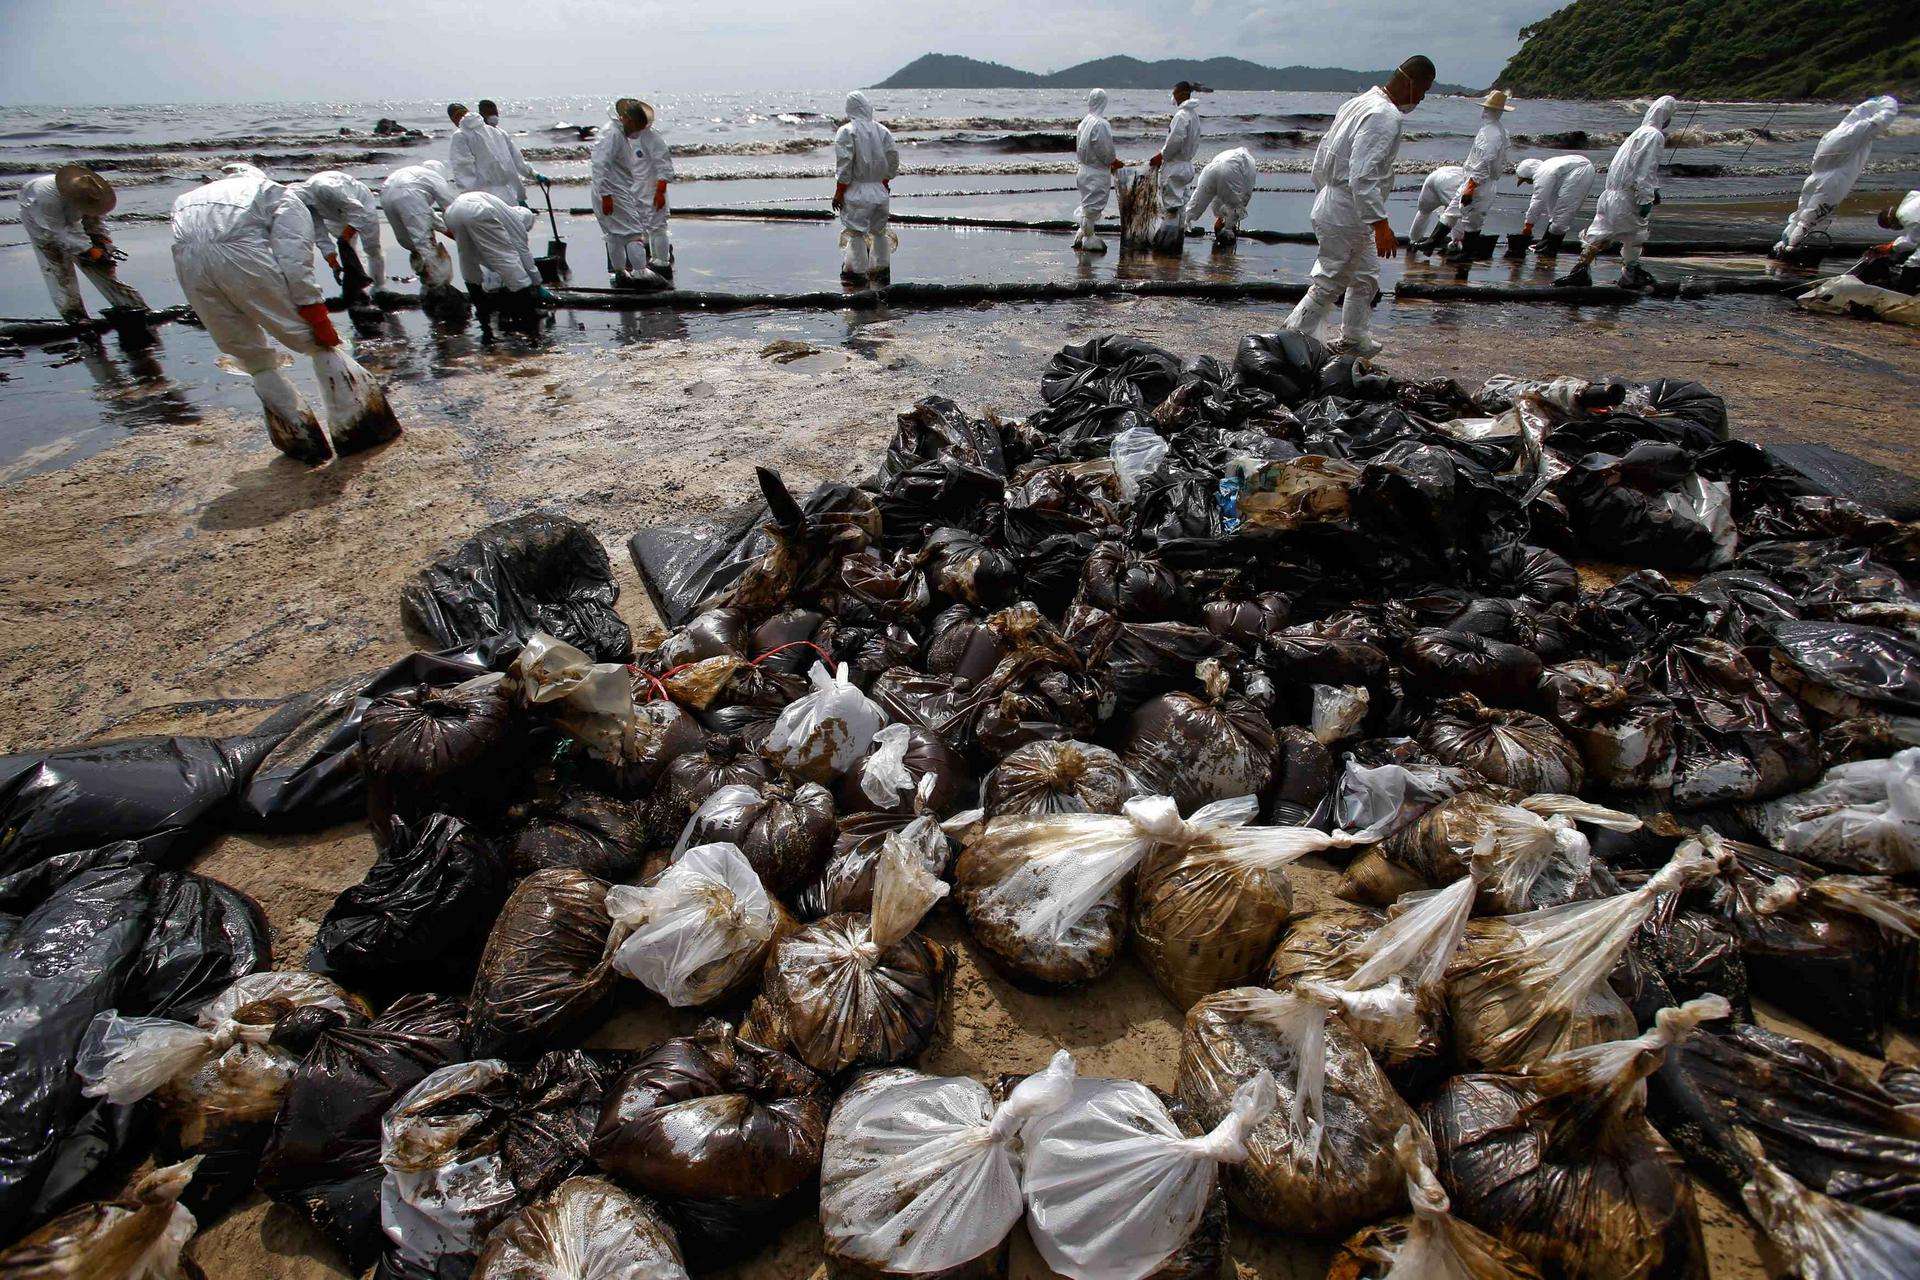 Soldiers in white biohazard suits work to contain the oil that has spilled onto Ao Prao beach on Koh Samet. Photo: Reuters